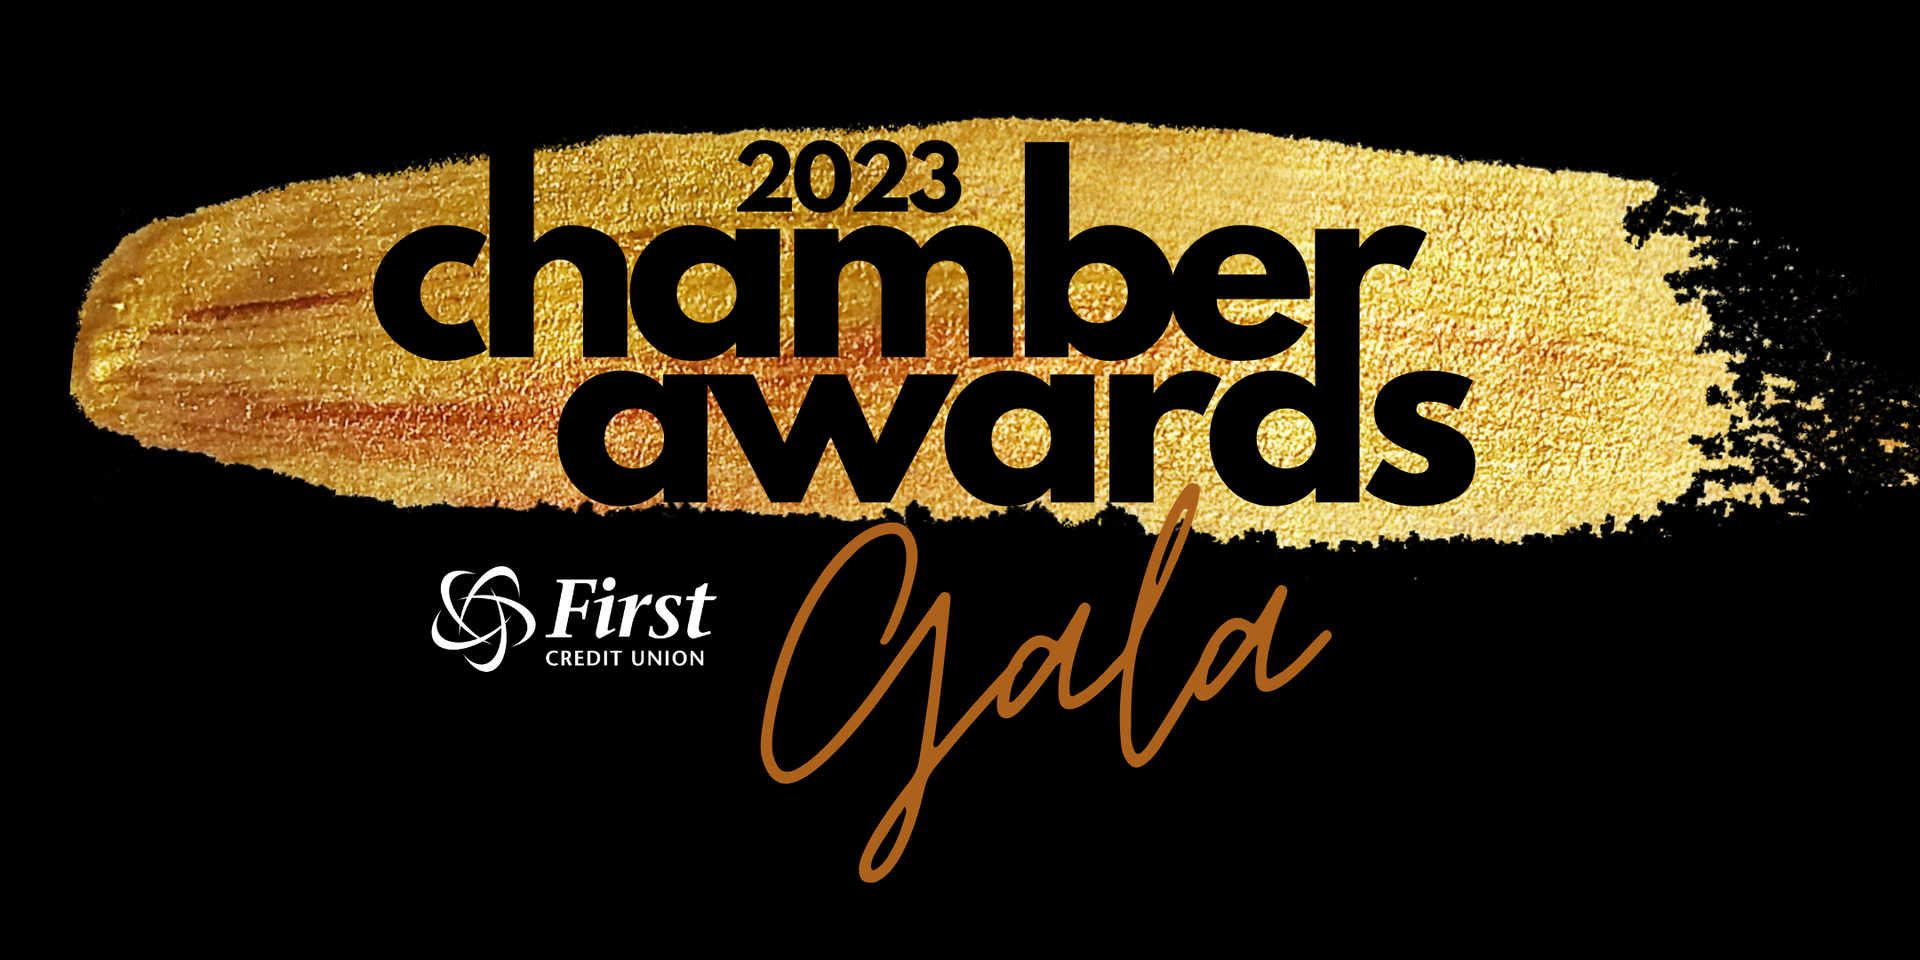 thumbnails 2023 Comox Valley Chamber Awards Gala - 'Go For the Gold!'